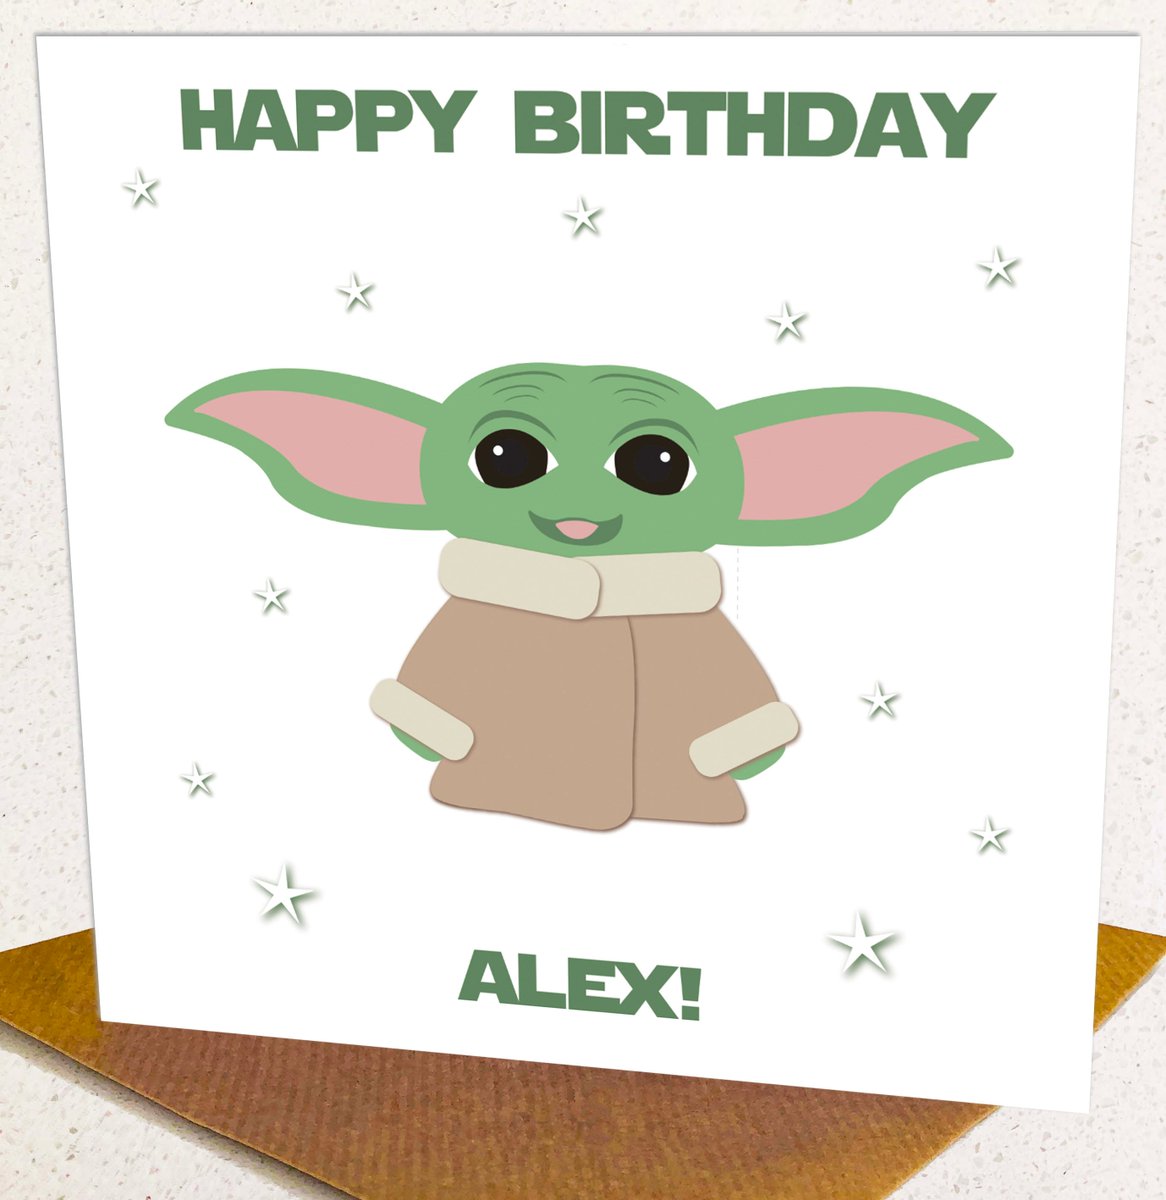 Latest addition to my #etsy shop: Baby Yoda Grogu Style Personalised Birthday Card for boy or girl, personalized age 1 2 3 4 5 6 7 8 9 10 11 12 13 14 15 16 17 18 etsy.me/3Zqqpco #birthday #personalisedname #childrensagecard #boyagecard #boybirthdaycard #persona